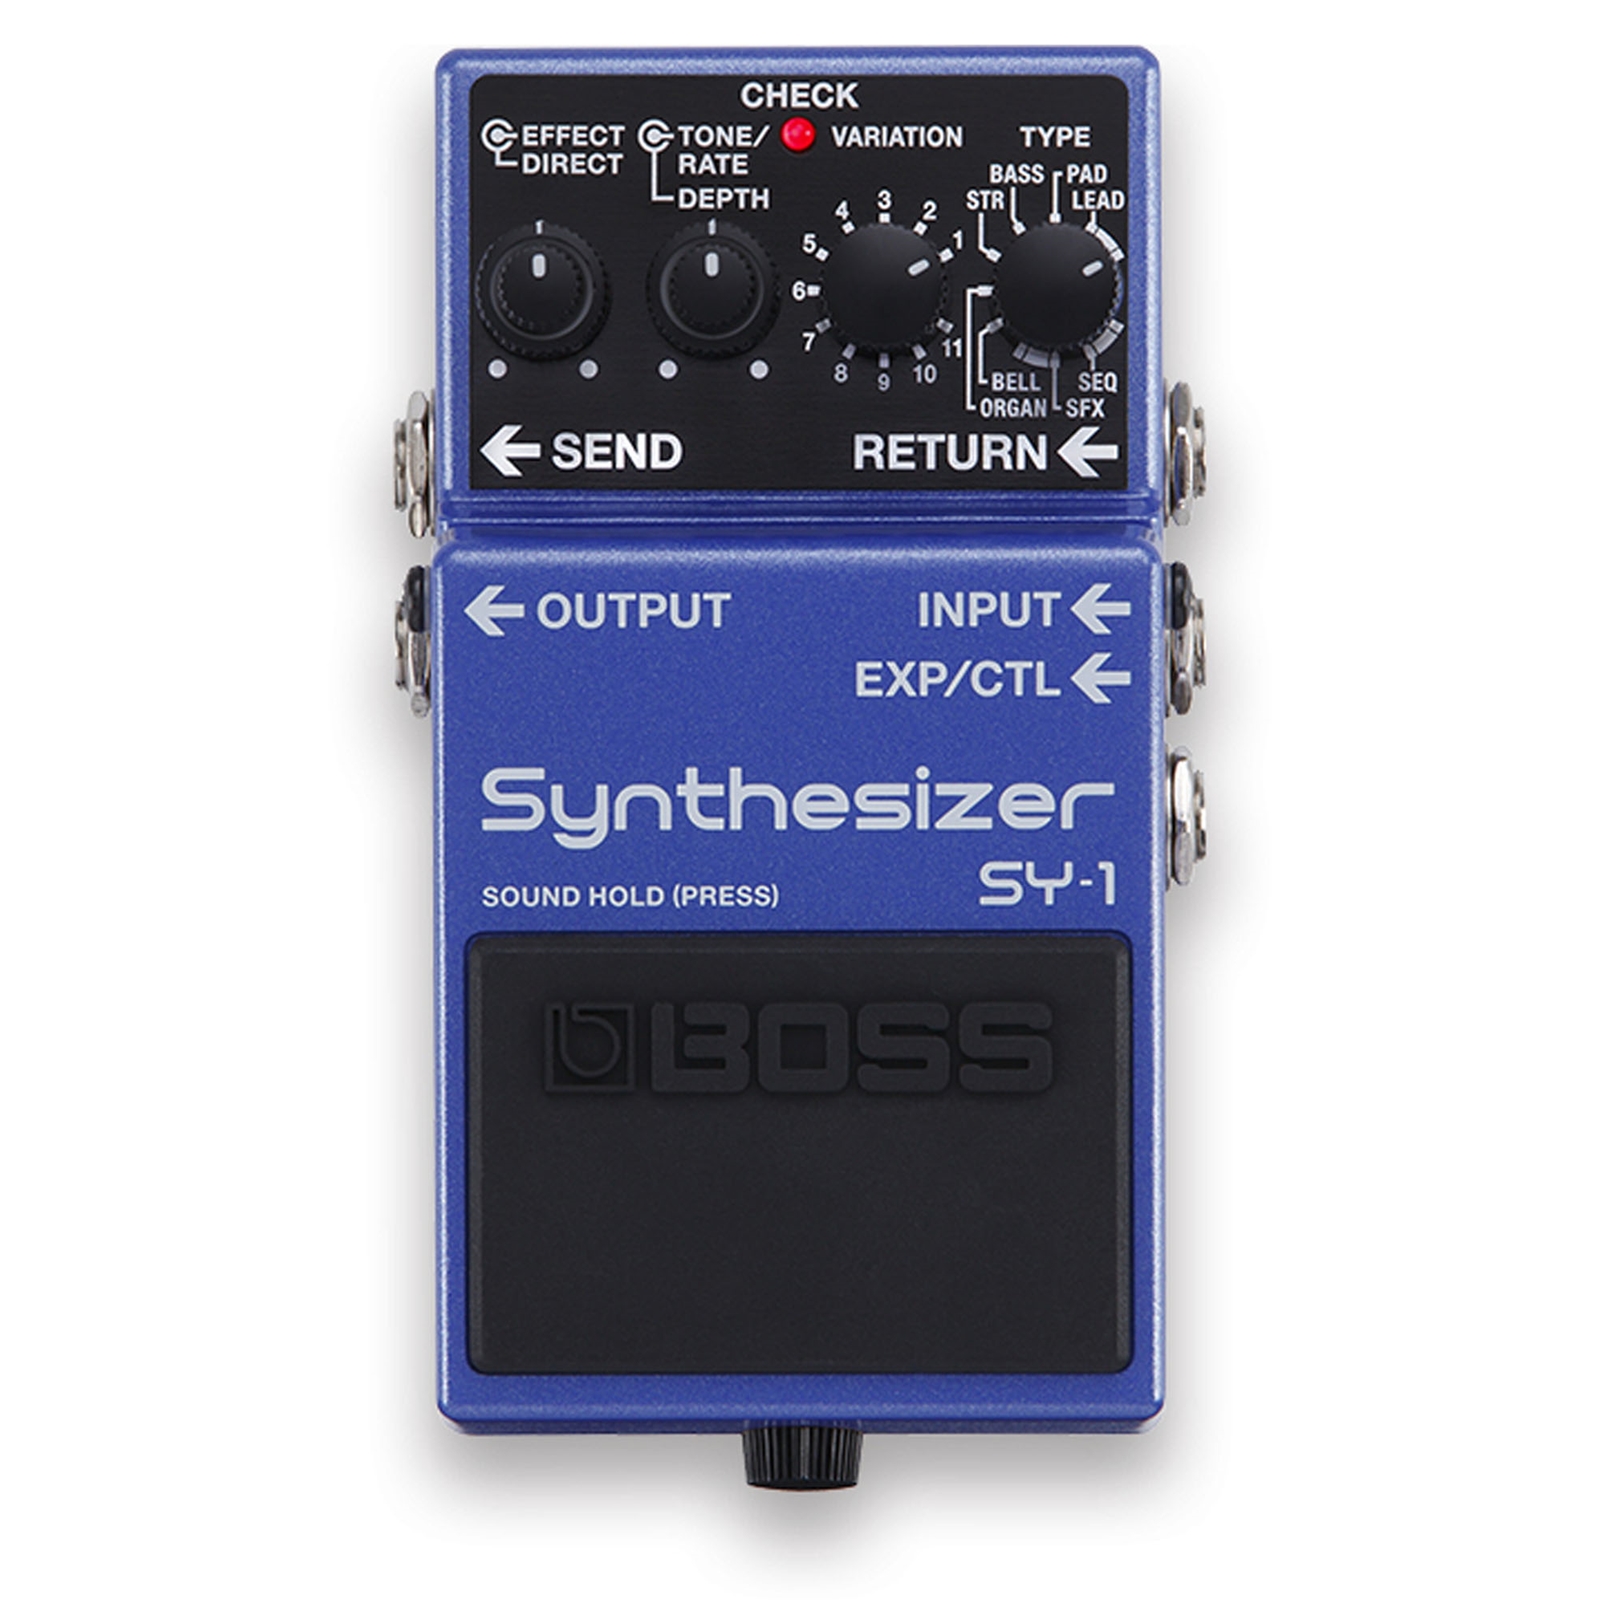 BOSS SY-1 Synthesizer Pedal